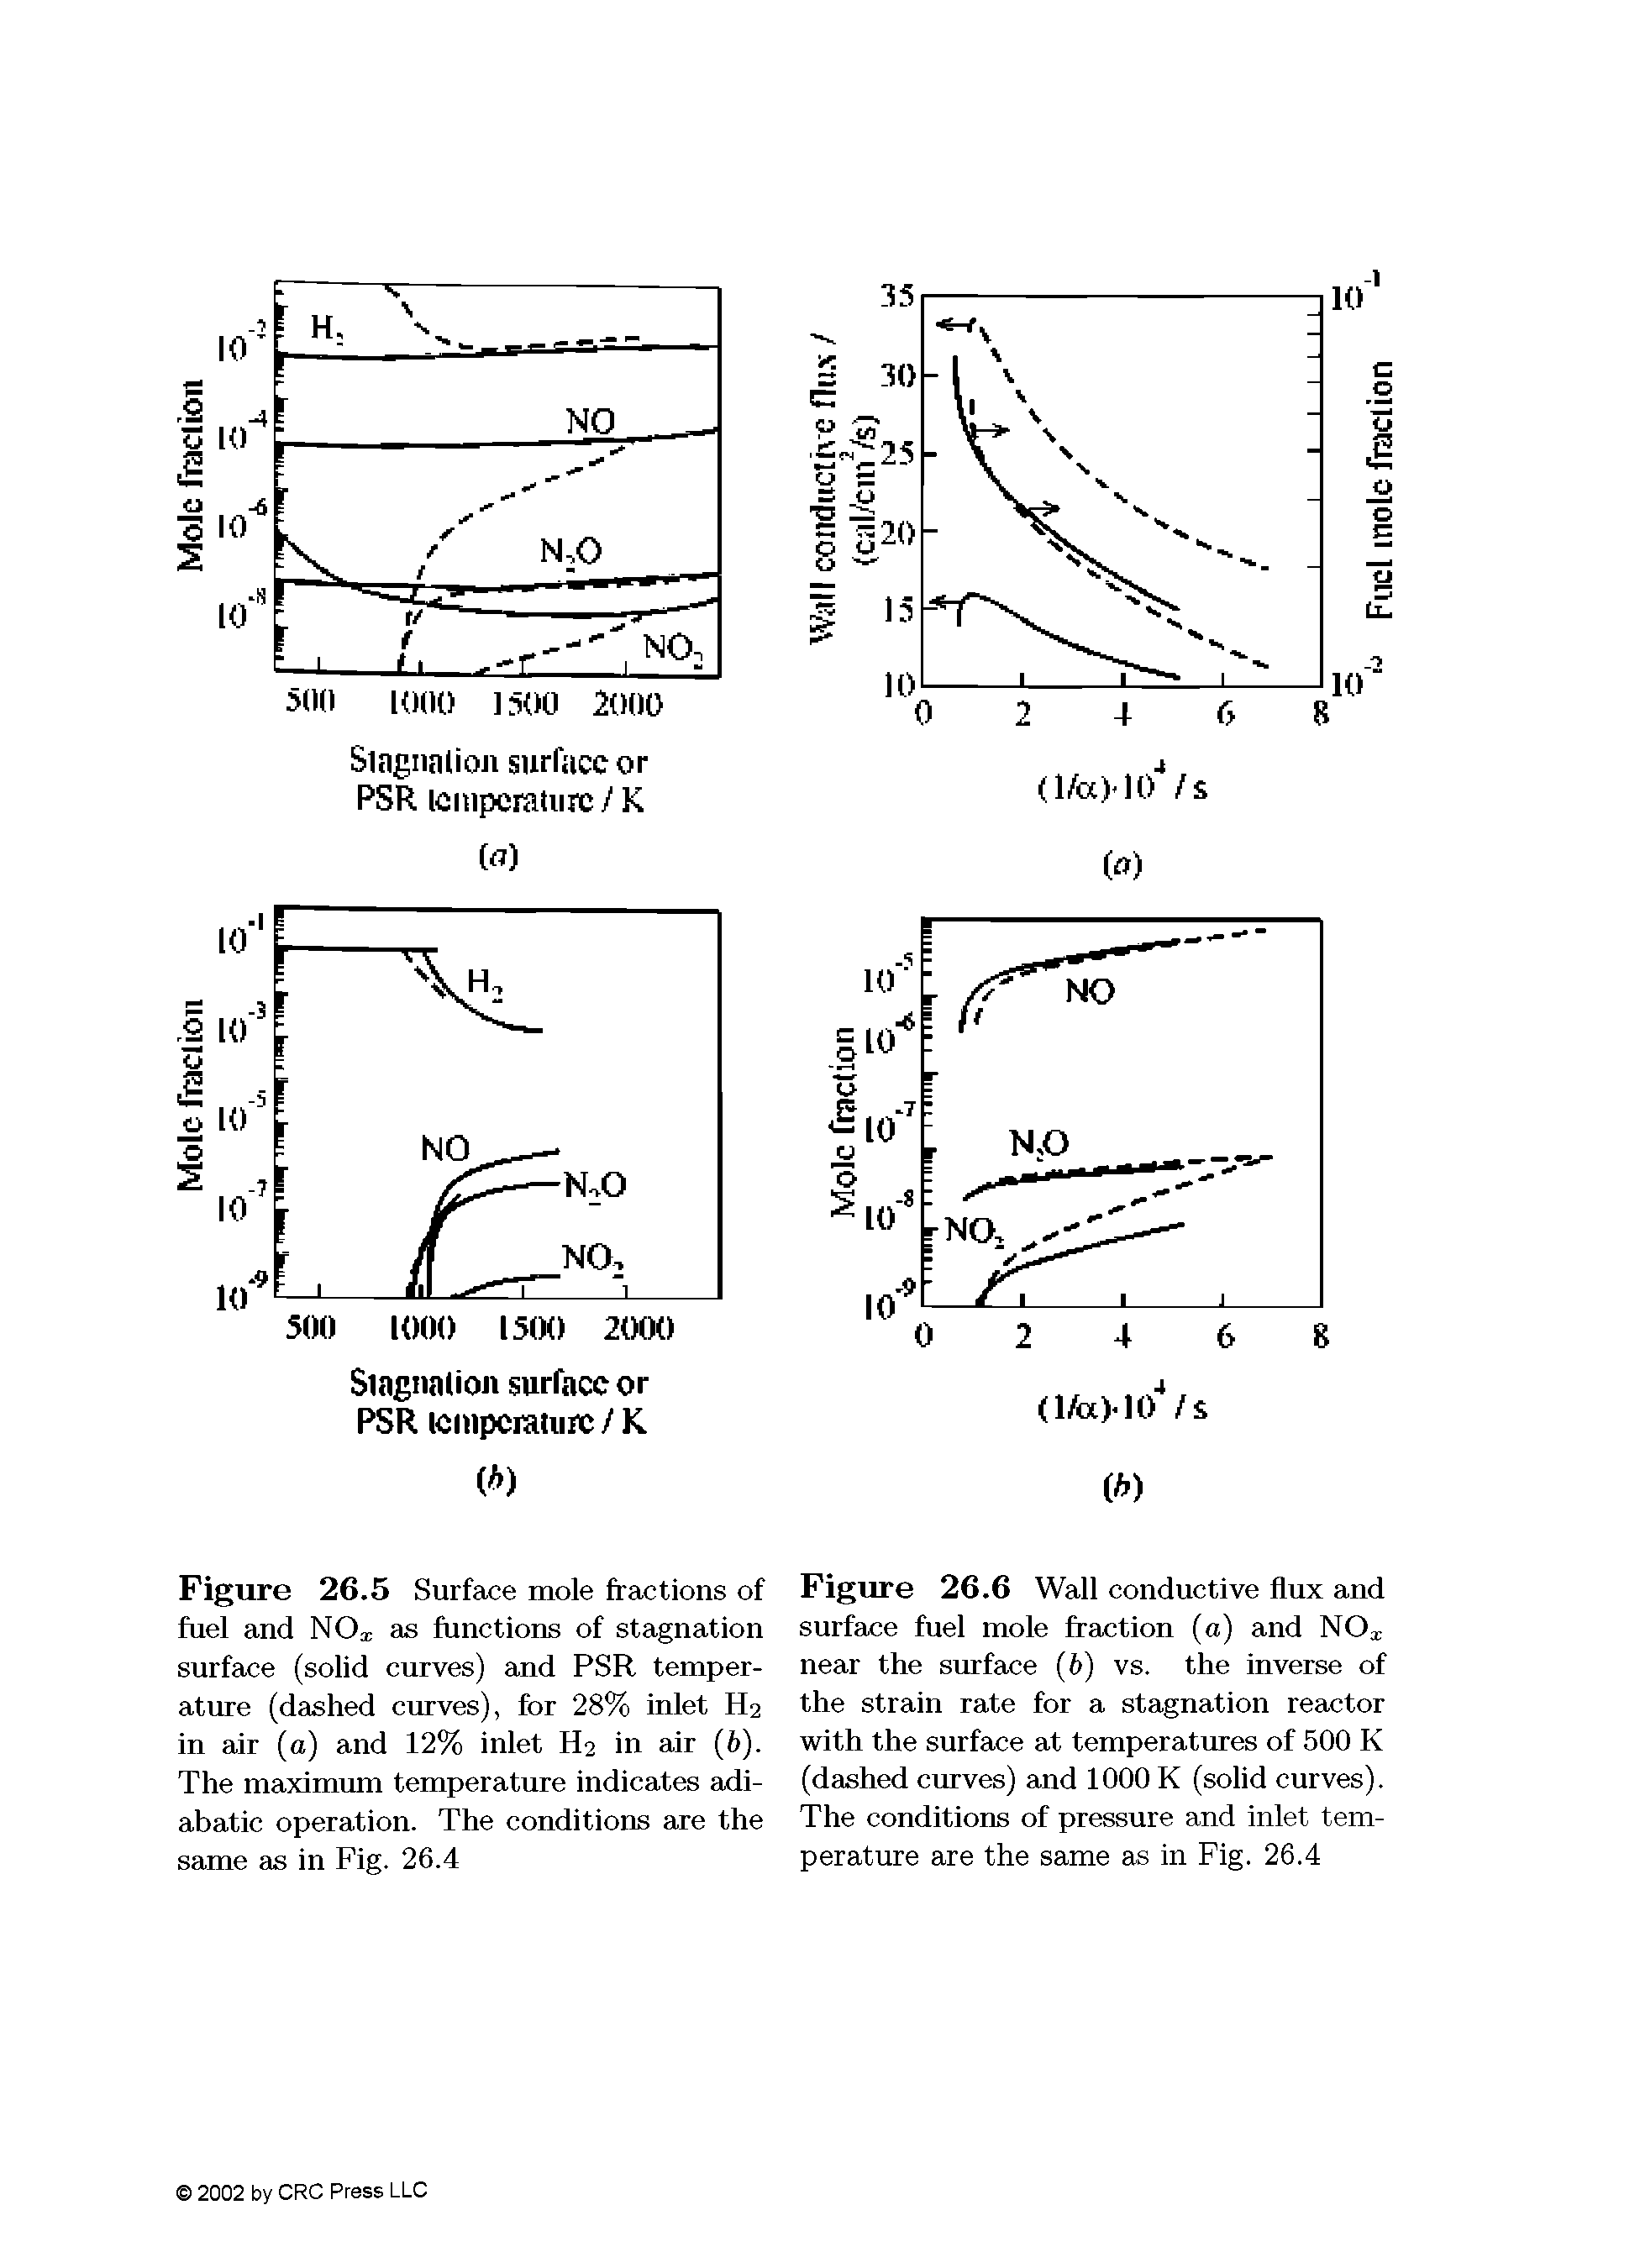 Figure 26.6 Wall conductive flux and surface fuel mole fraction (a) and NOa, near the surface (6) vs. the inverse of the strain rate for a stagnation reactor with the surface at temperatures of 500 K (dashed curves) and 1000 K (solid curves). The conditions of pressure and inlet temperature are the same as in Fig. 26.4...